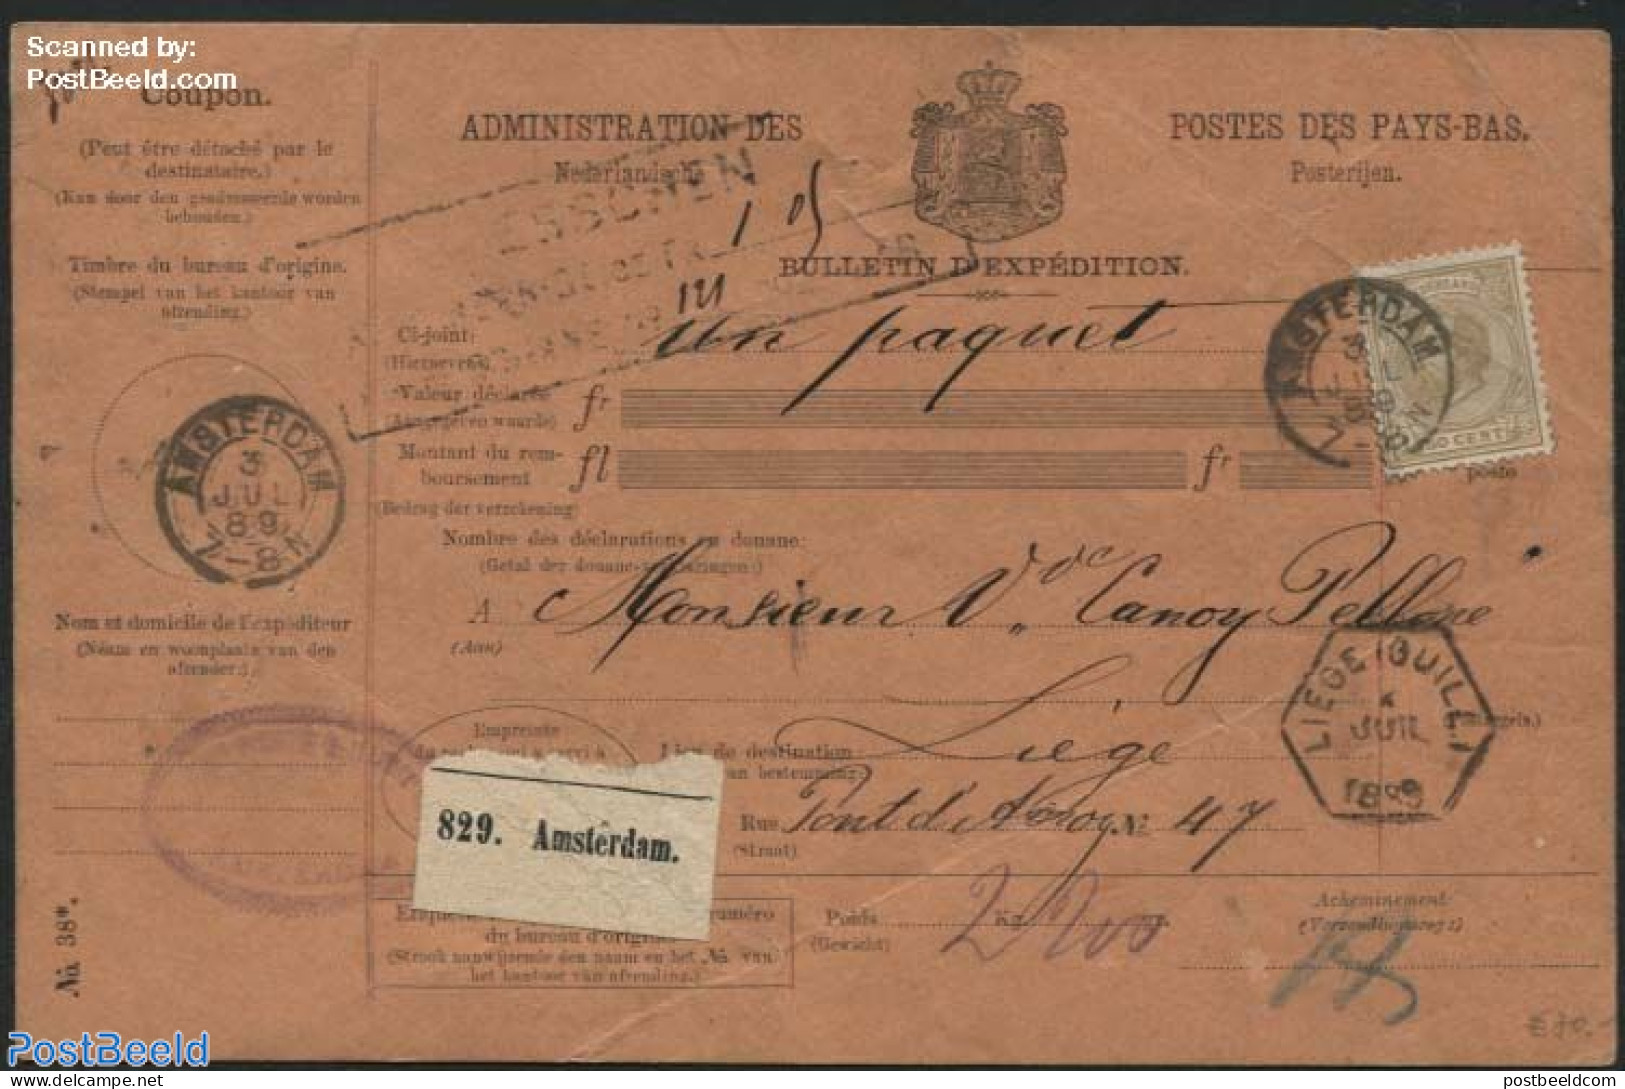 Netherlands 1889 Parcel Card With 50c Stamp Willem III, Postal History - Lettres & Documents